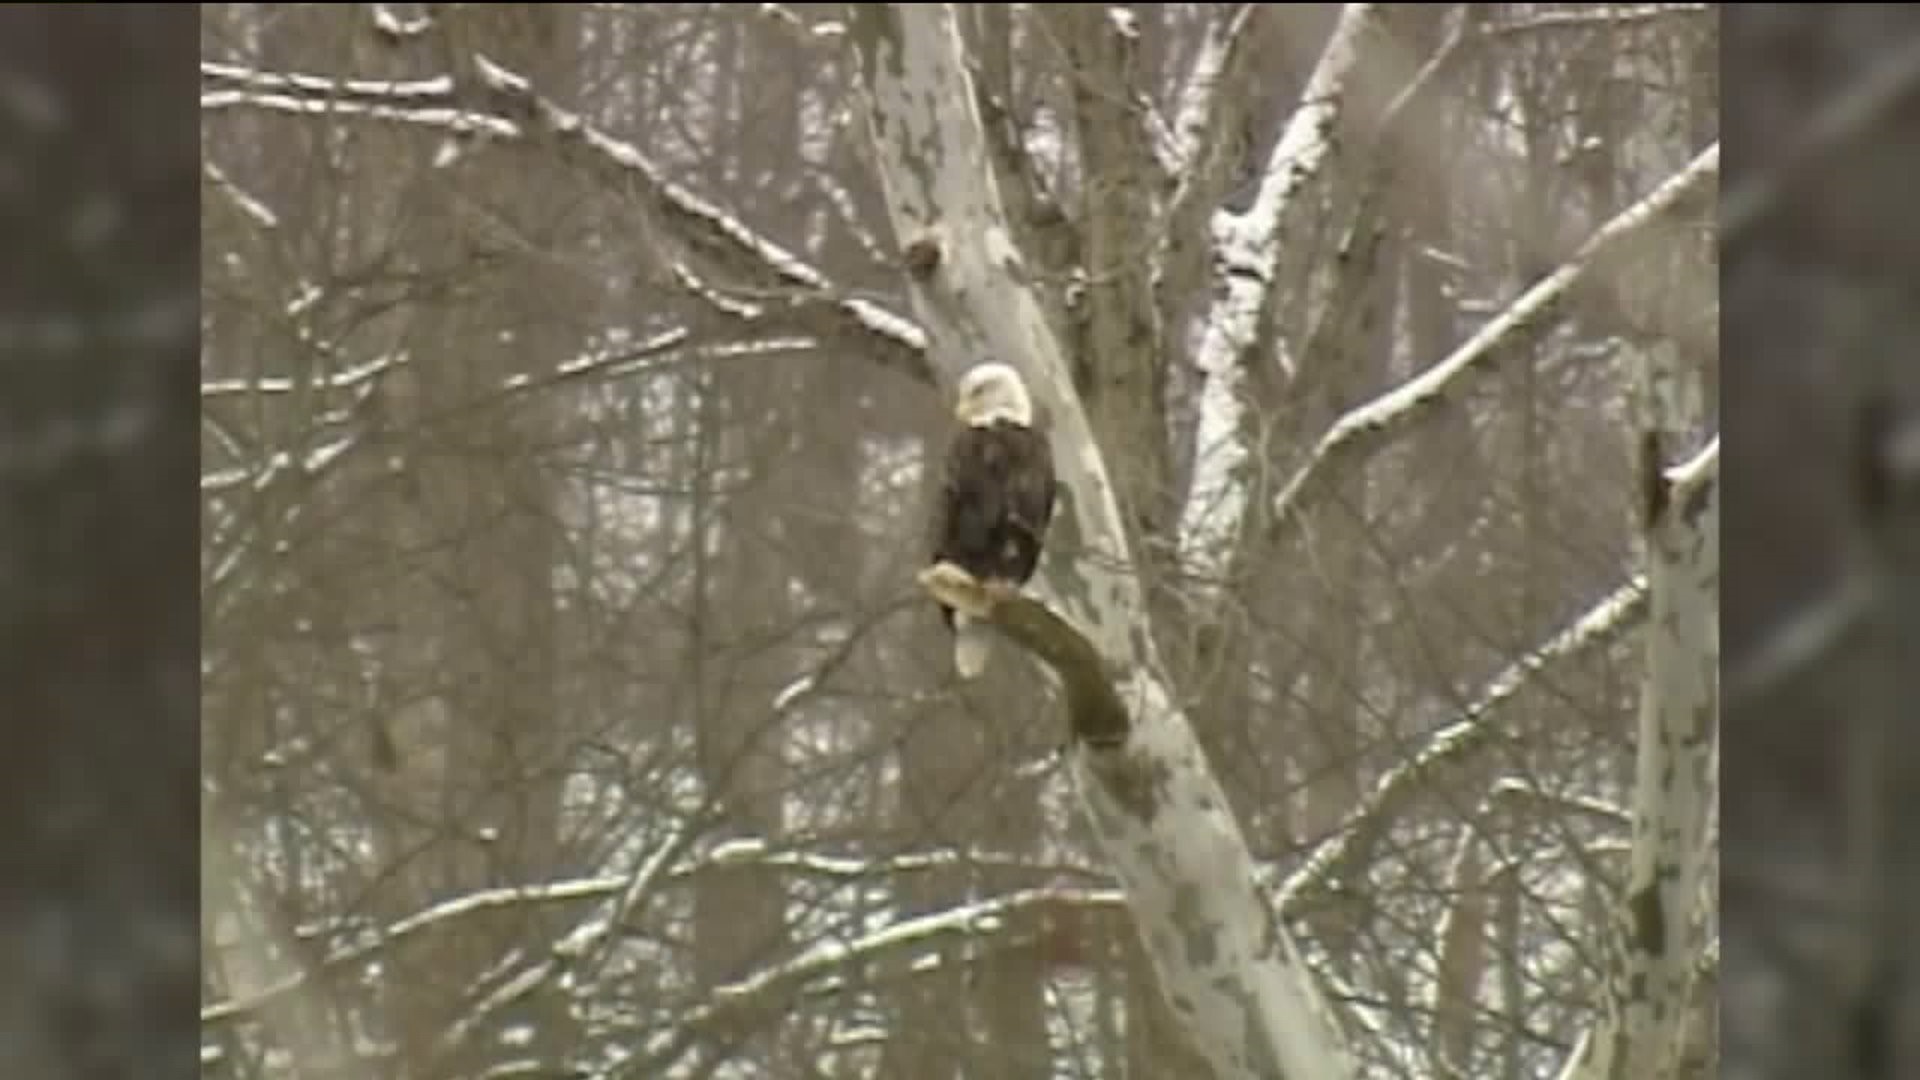 Searching for Eagles in Pike County